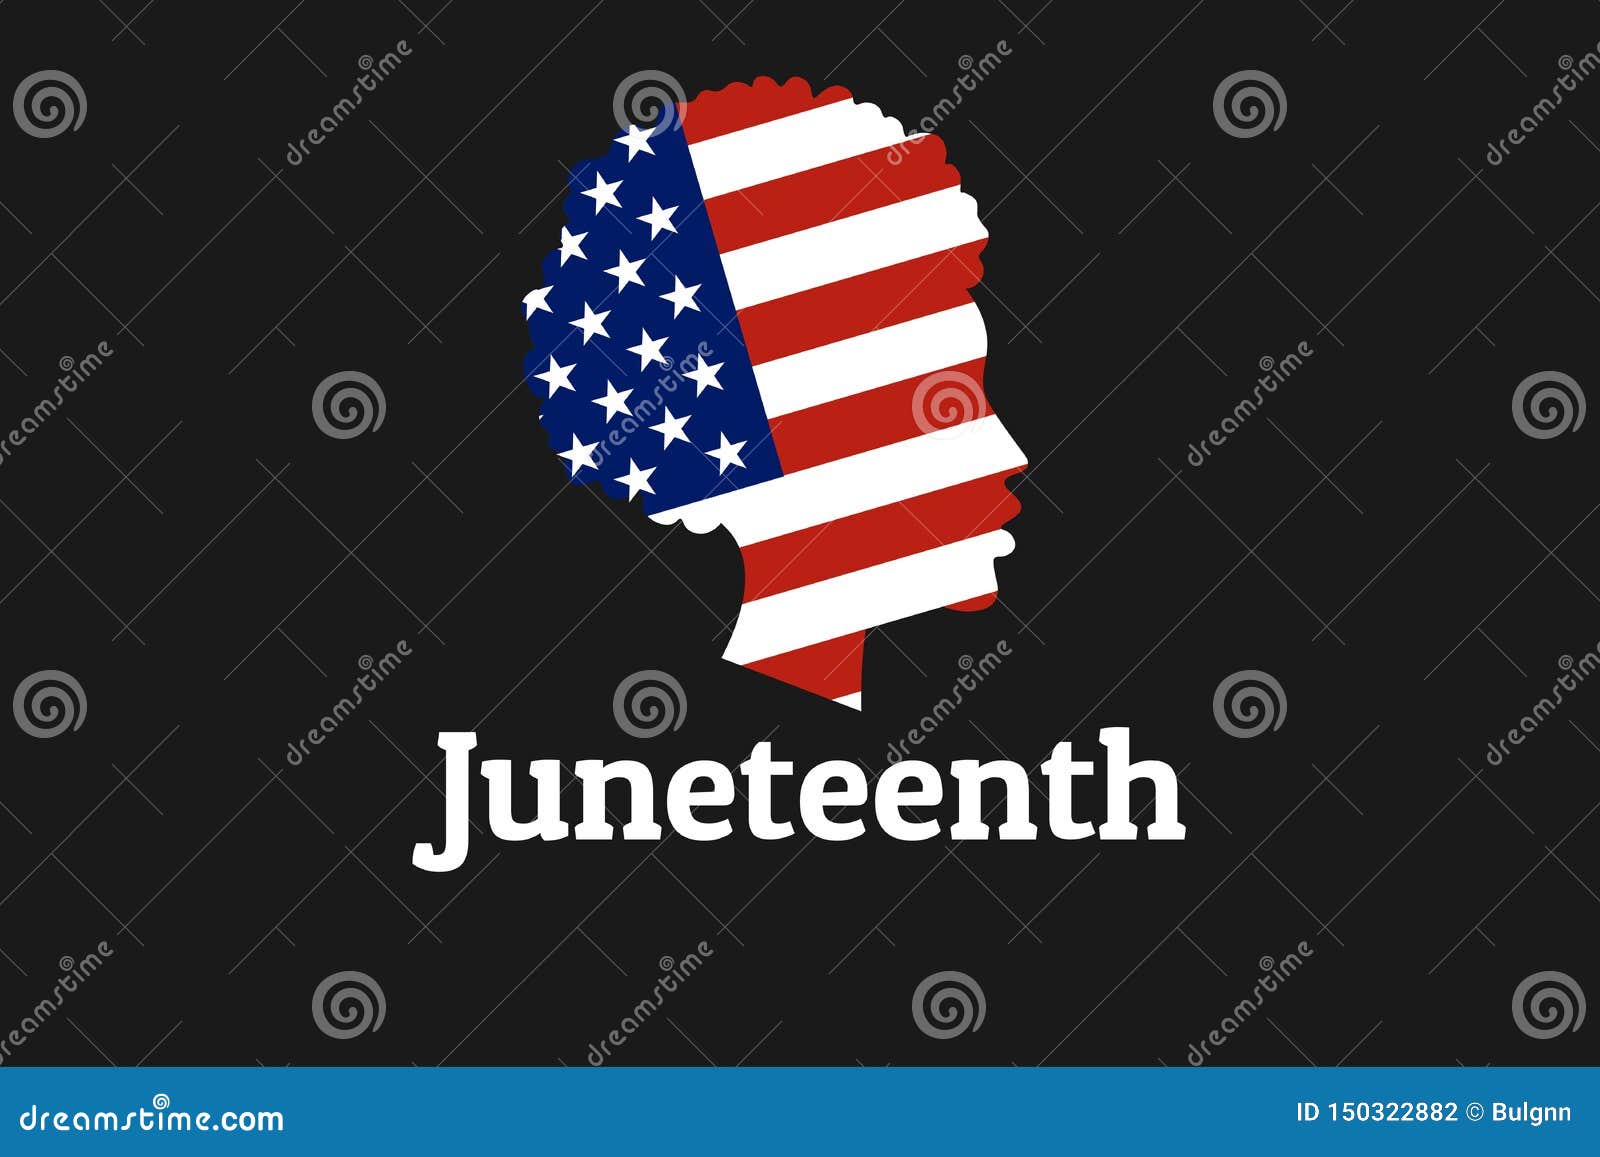 Juneteenth Freedom Emancipation Independence Day June 19